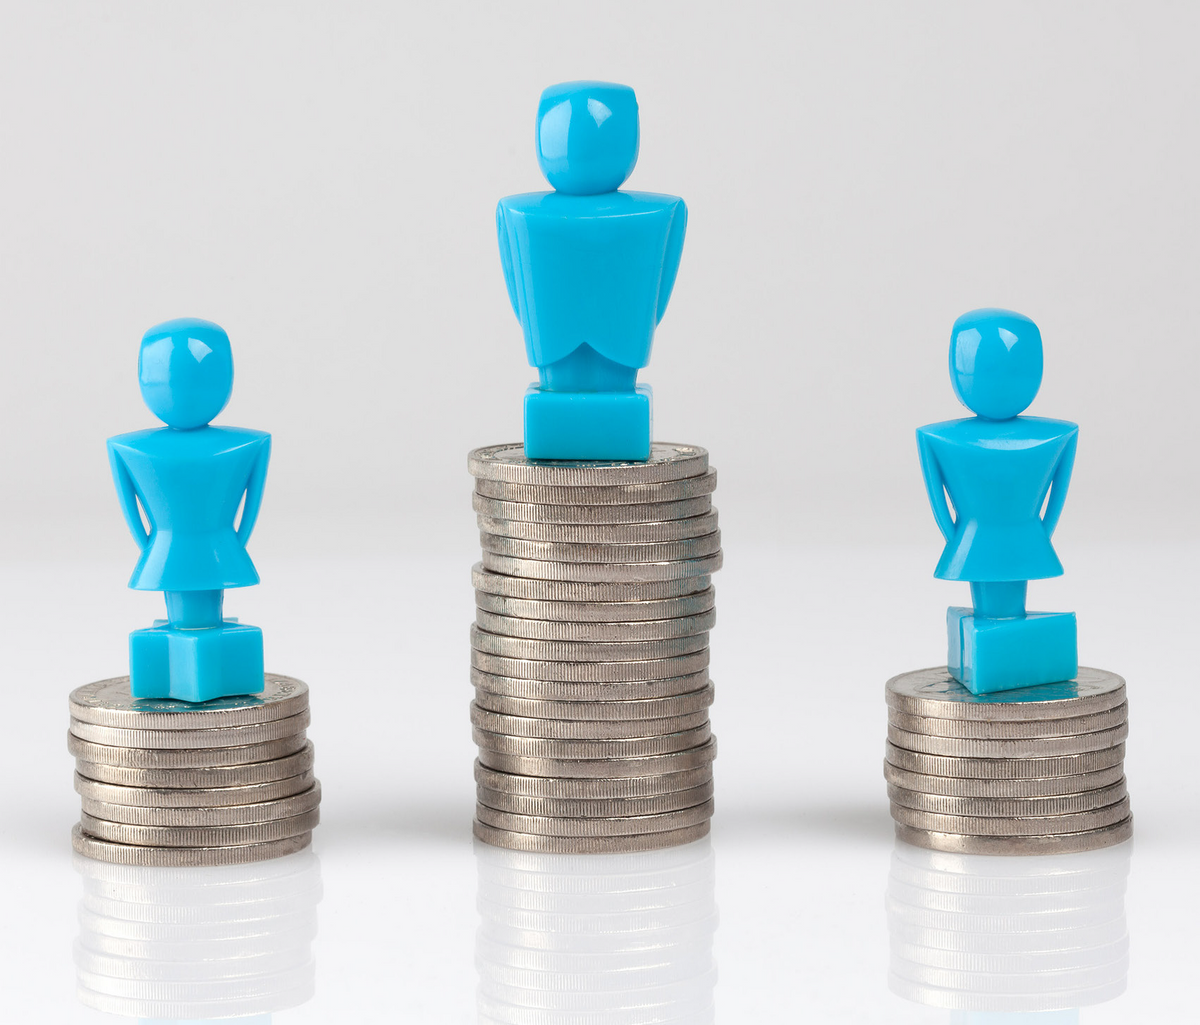 Six tips for helping to bridge your organisation’s gender pay gap